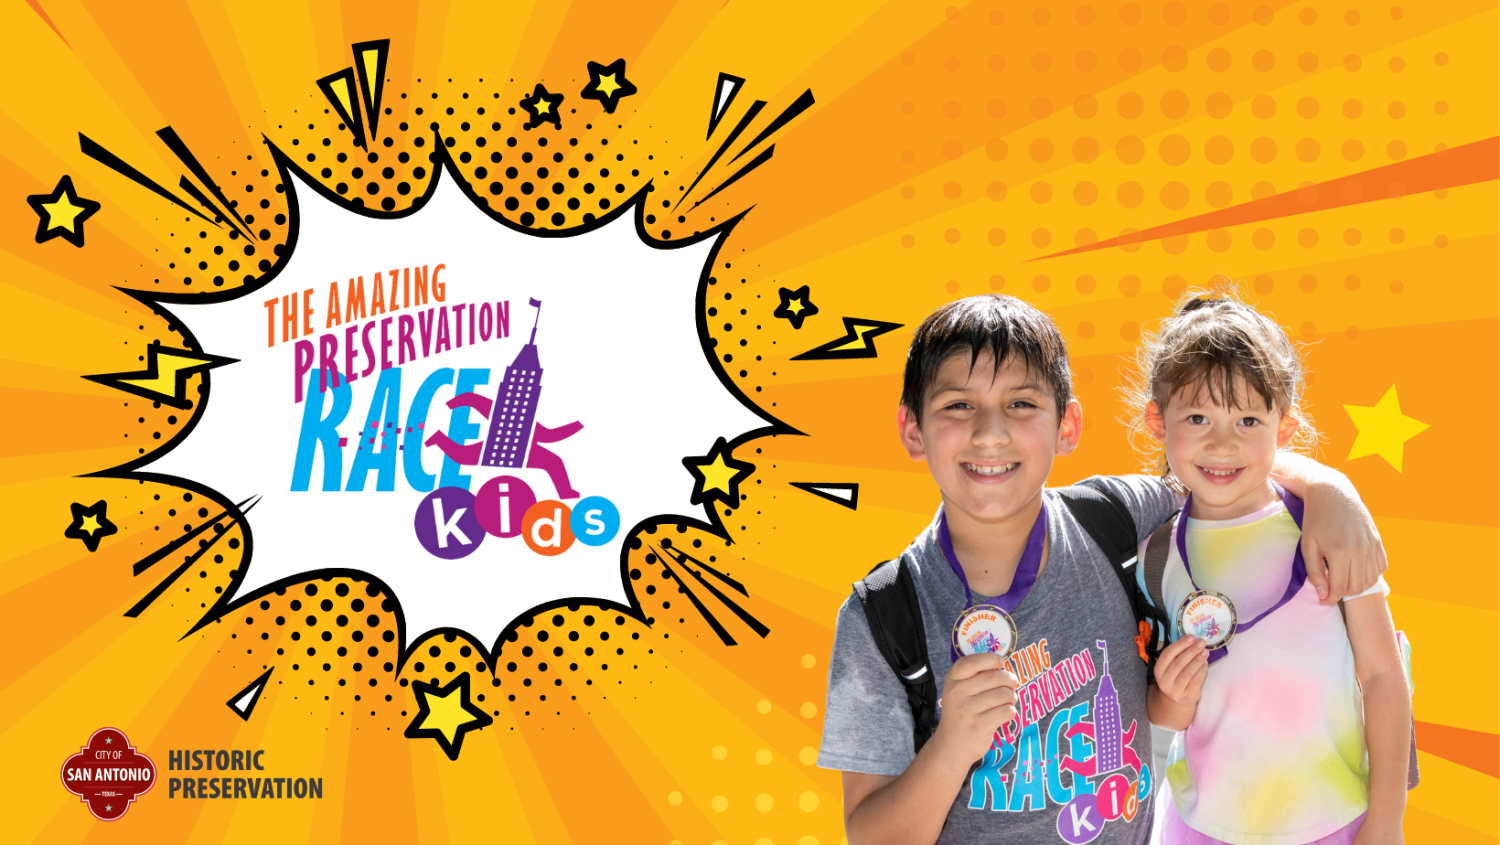 Featured image for The Amazing Preservation Race for Kids